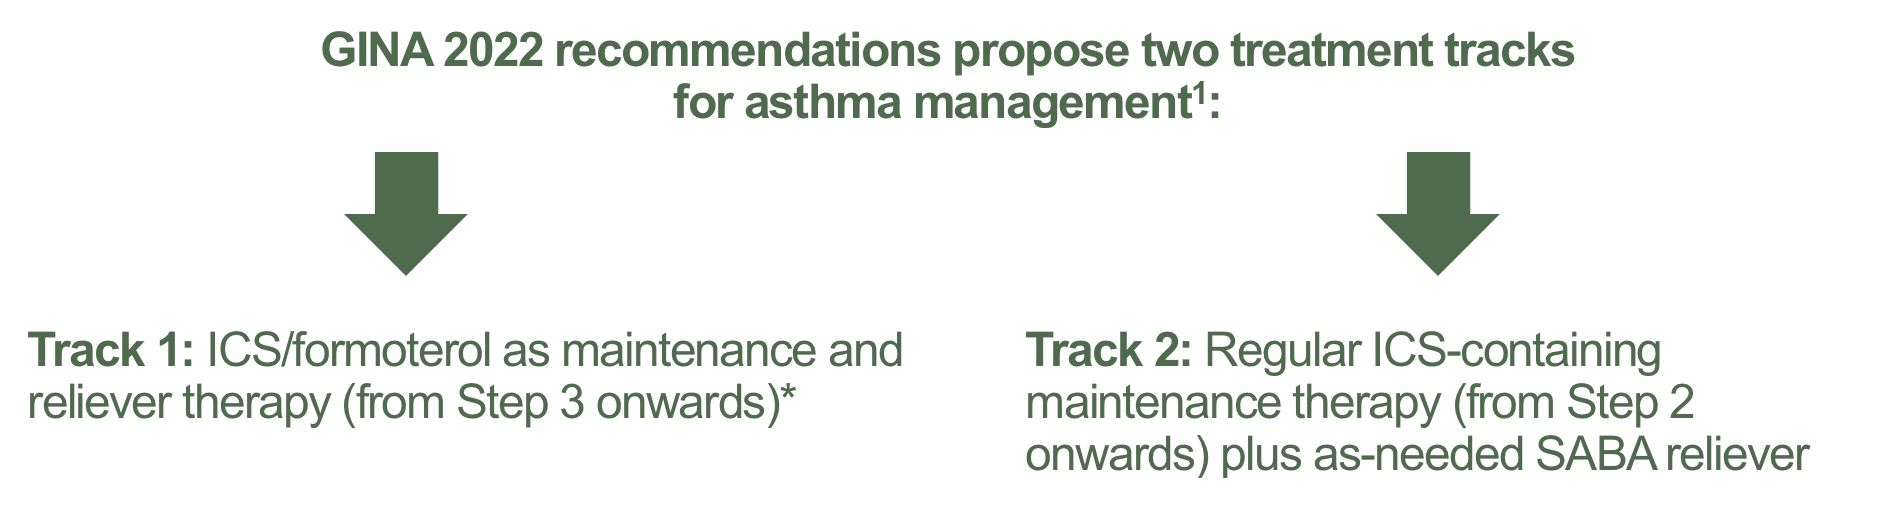 GINA 2022 recommendations propose two treatment tracks  for asthma management